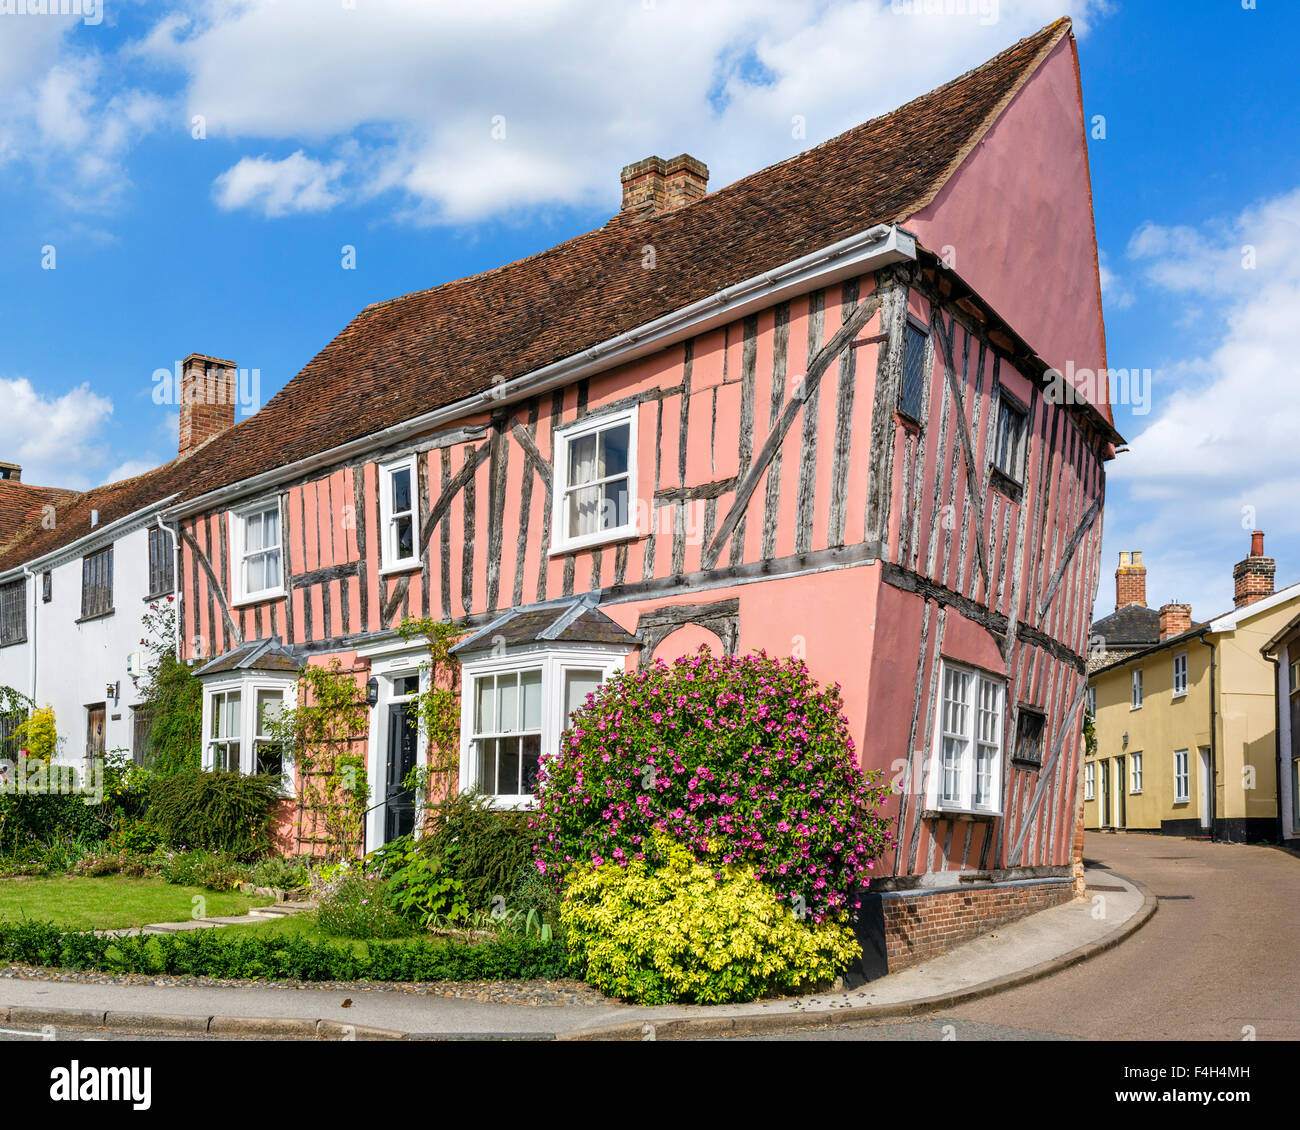 Lavenham Suffok. A colourful old crooked house in the village of Lavenham, Suffolk, England, UK Stock Photo